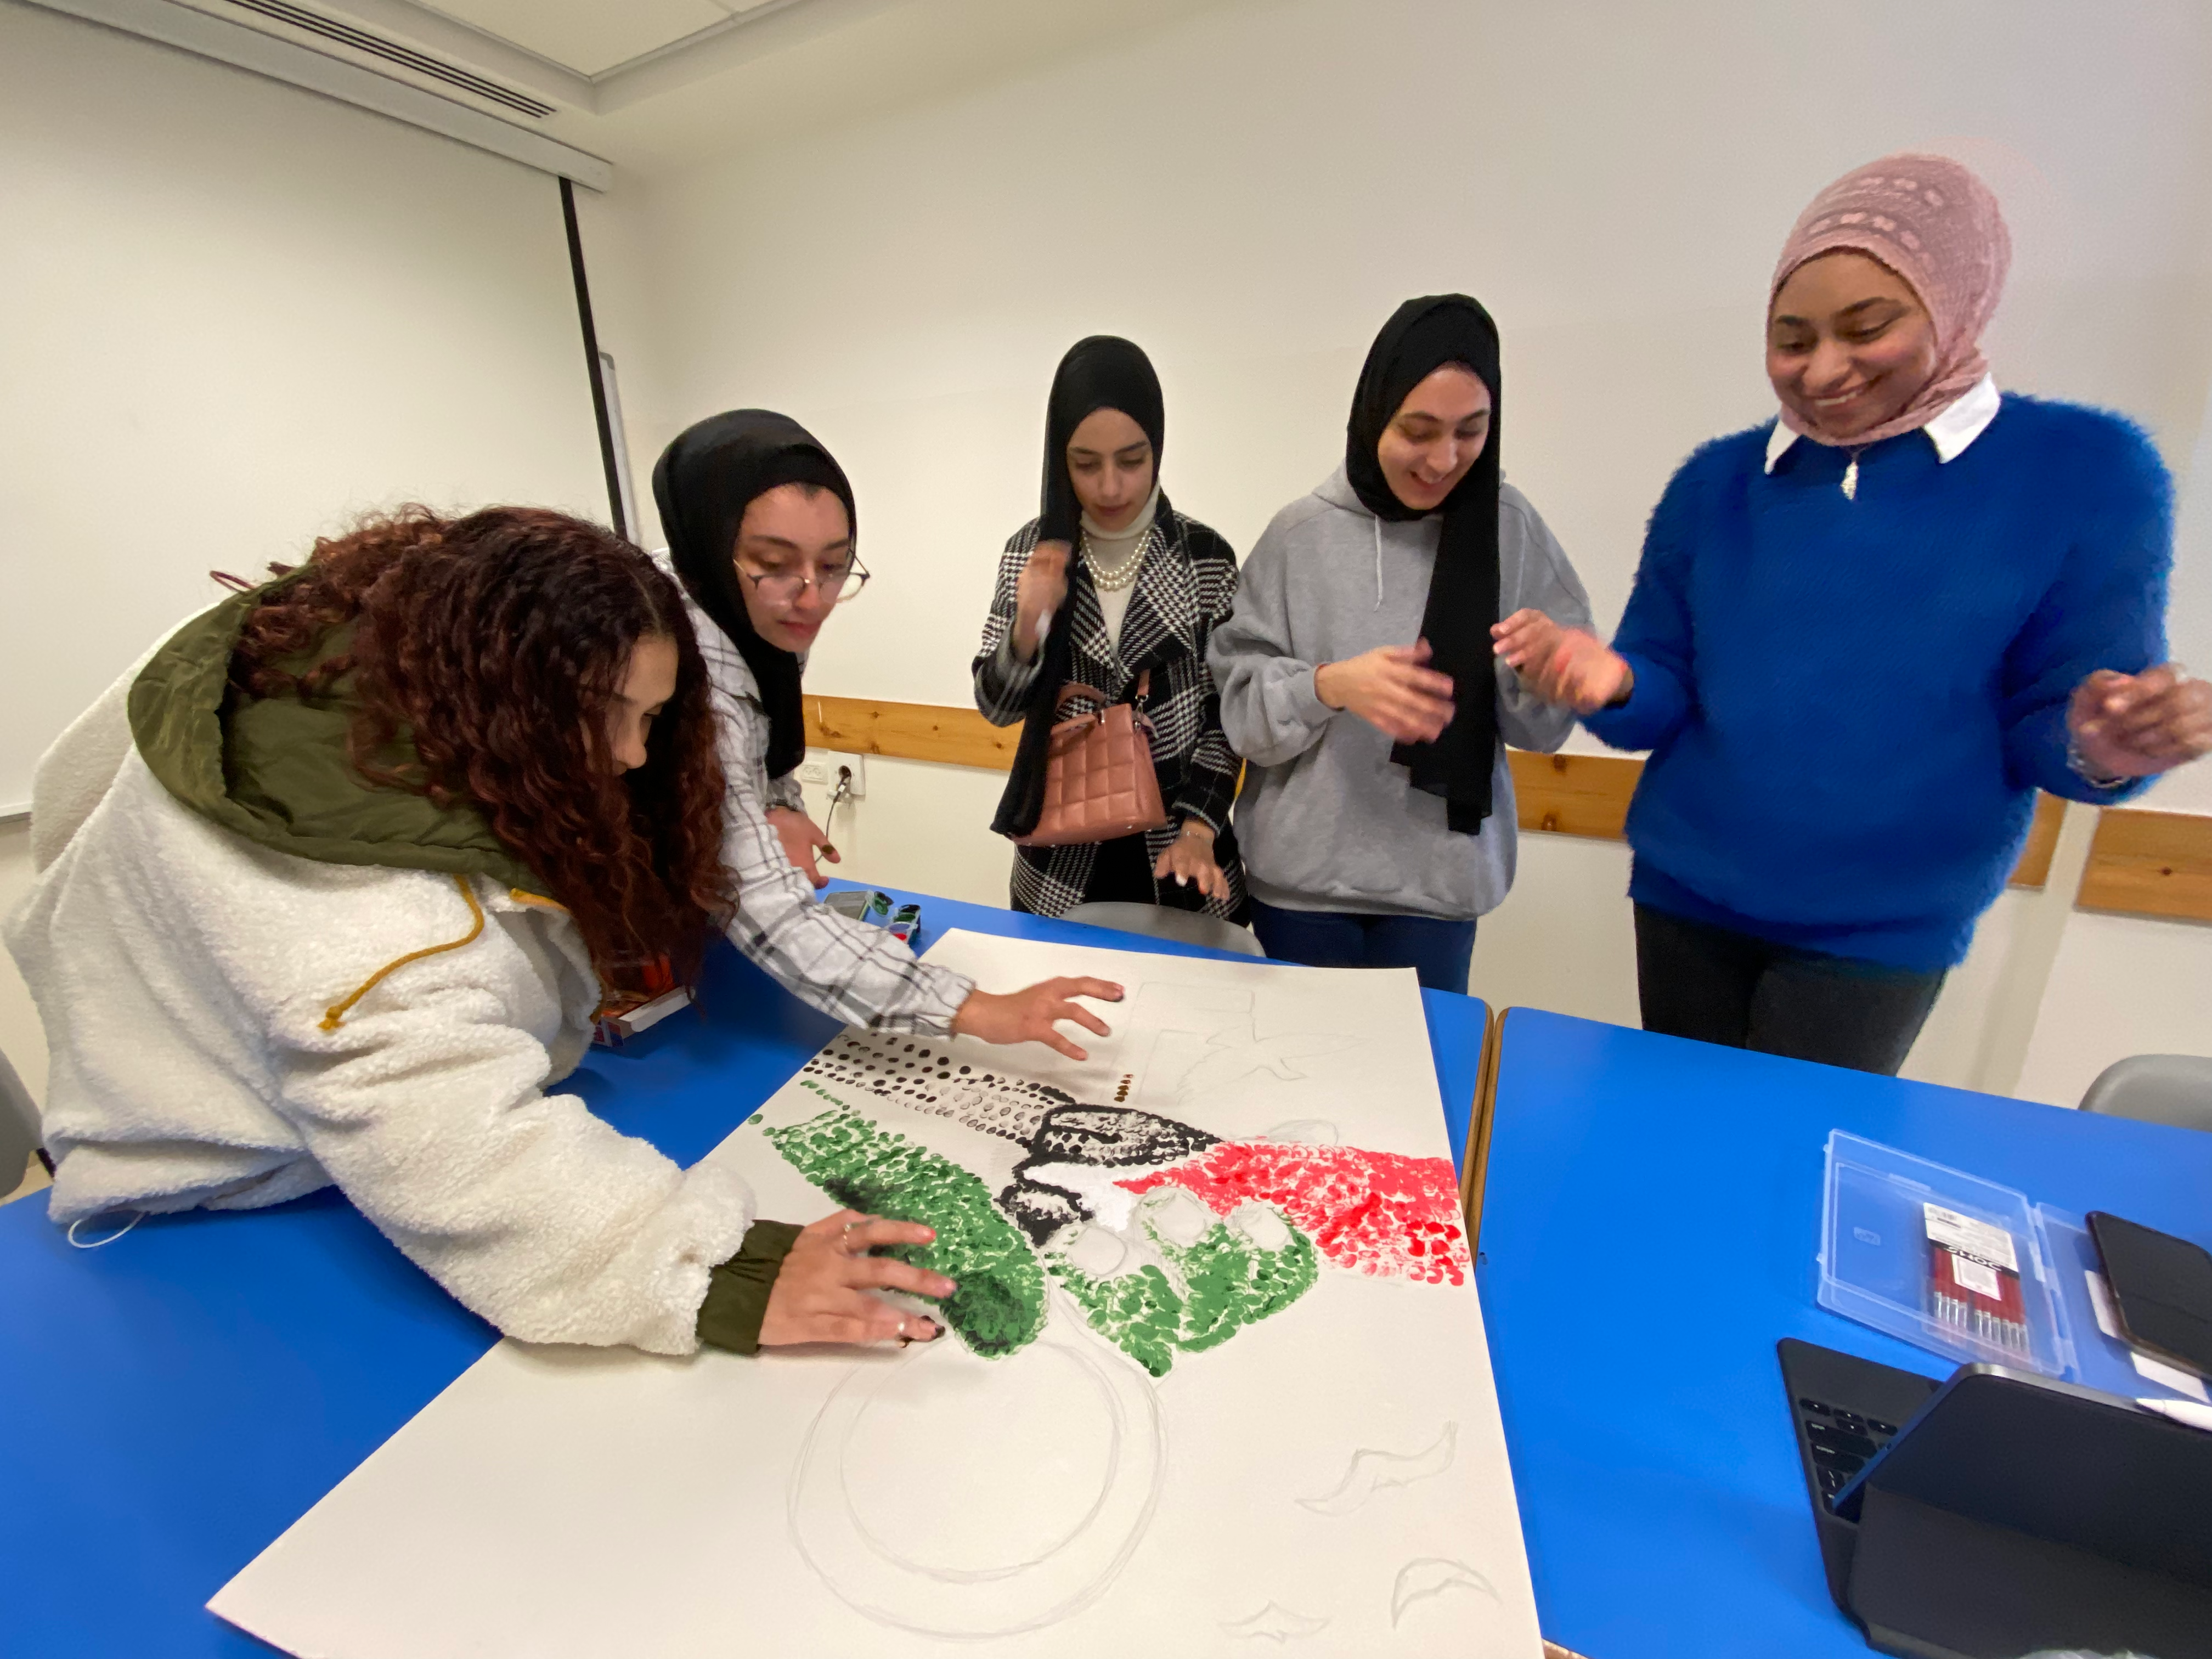 Five students work on a painting composed of many fingerprints, in the colors of the Palestinian flag.